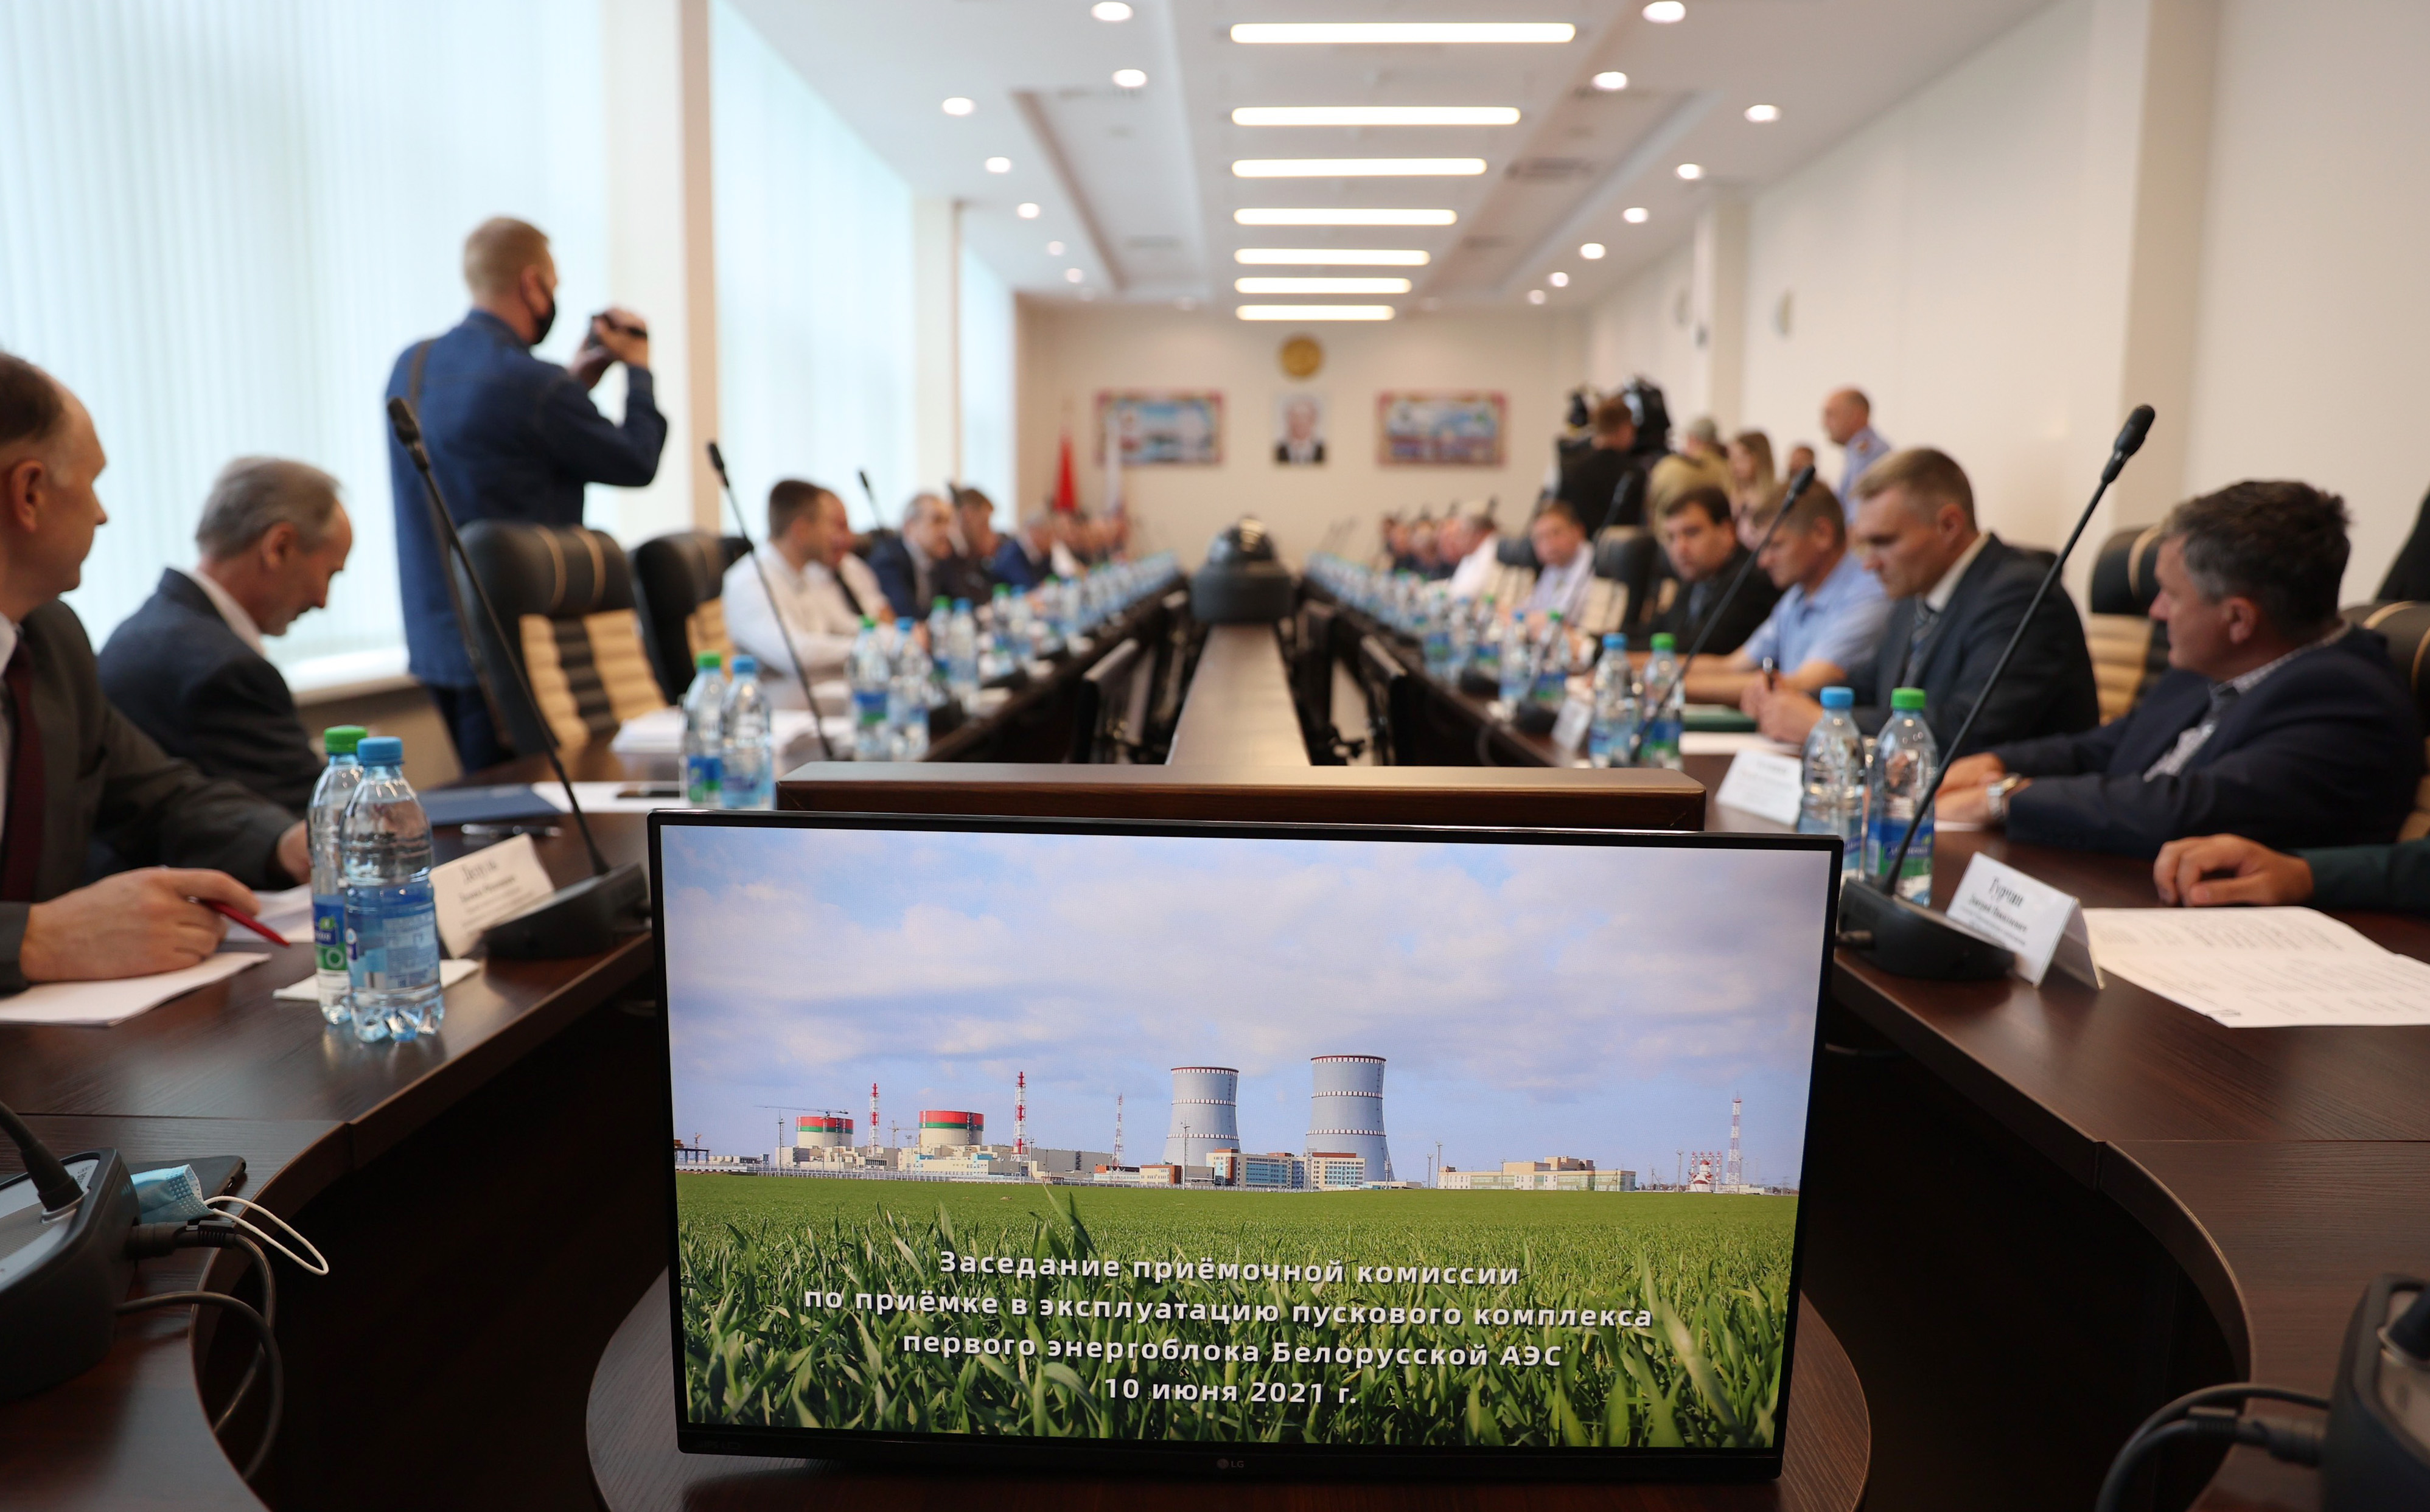 First power unit of Belarusian NPP enters commercial operation